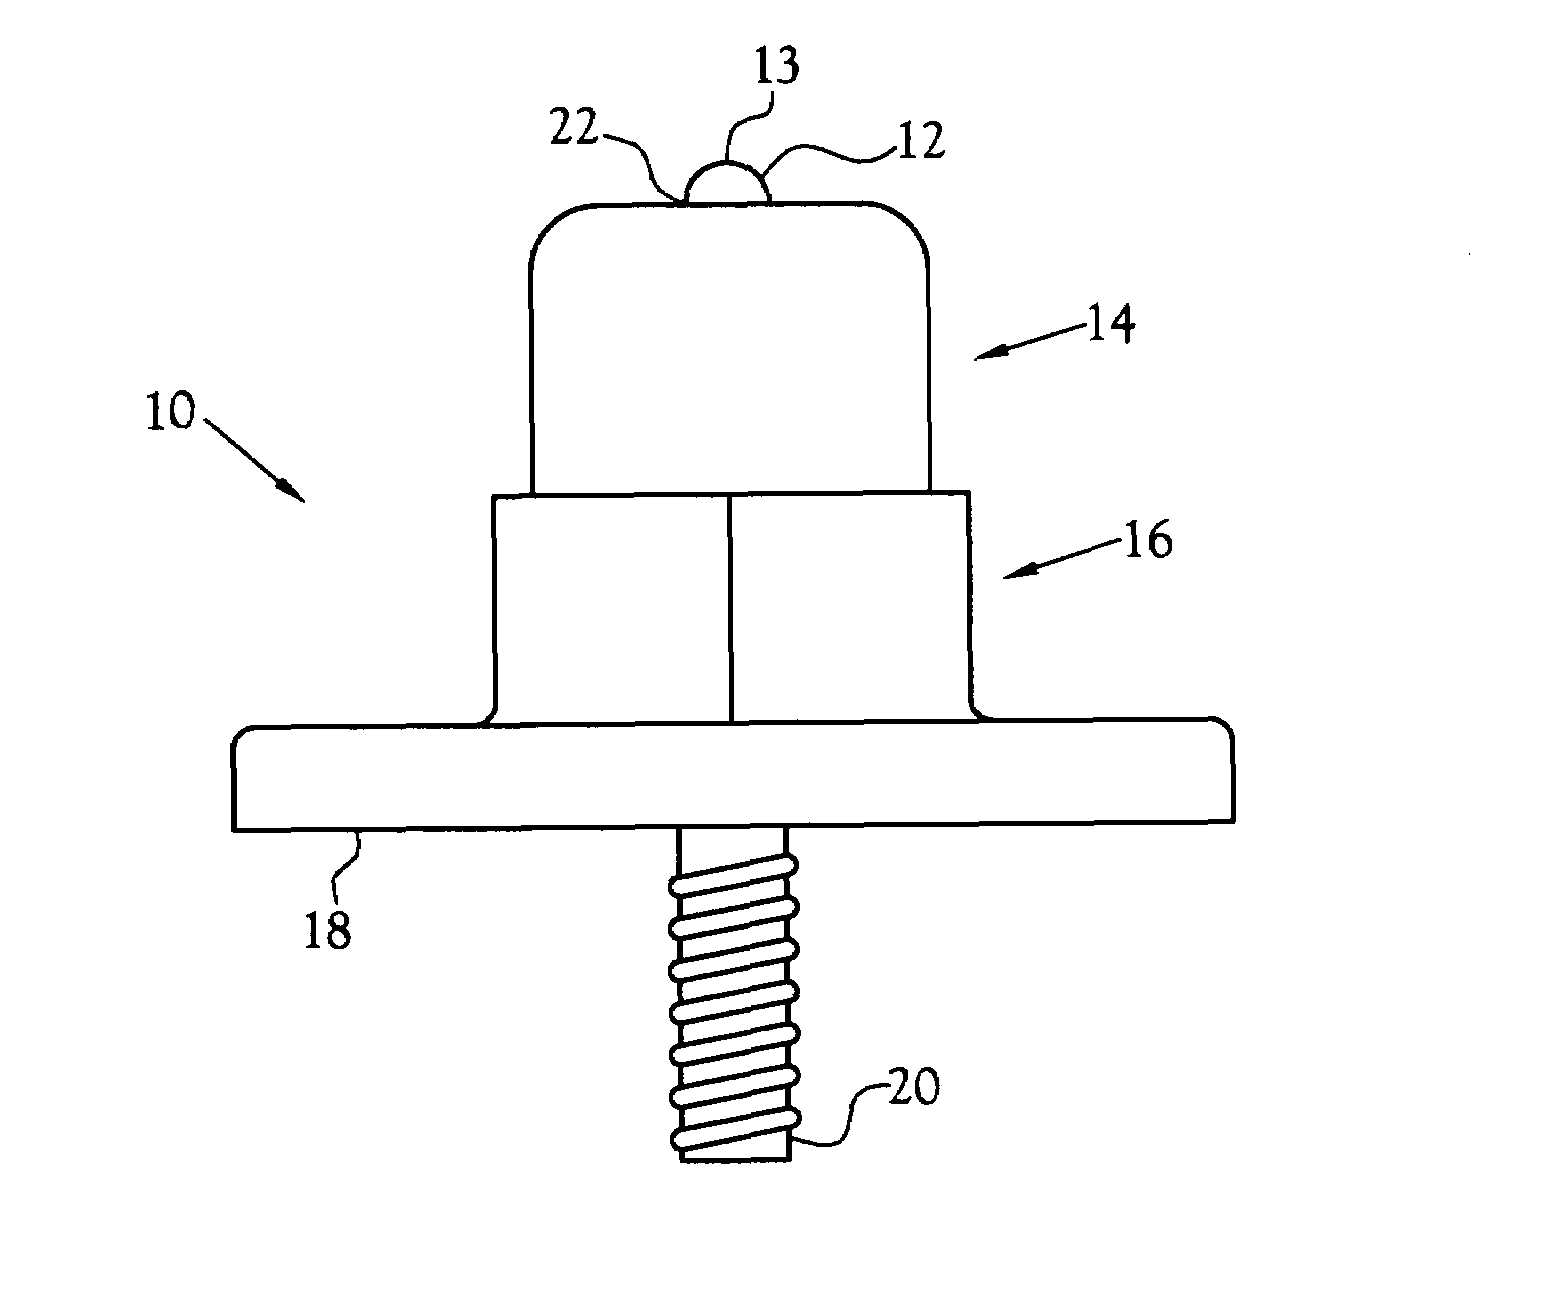 Insulated probe device